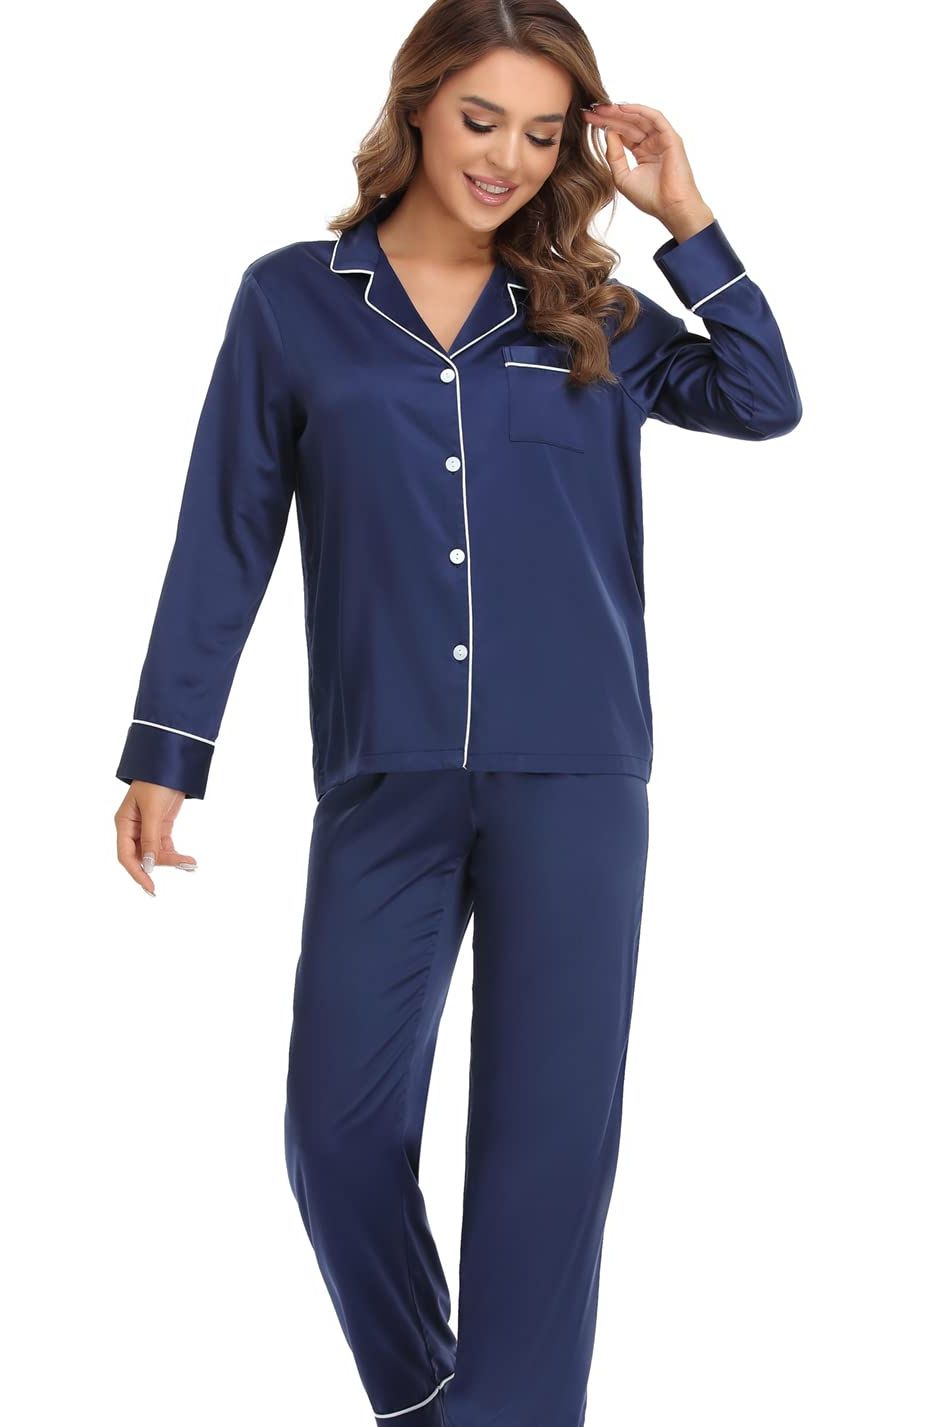 The Most Comfortable Pajamas I Can't Stop Wearing! - Fabulously Overdressed